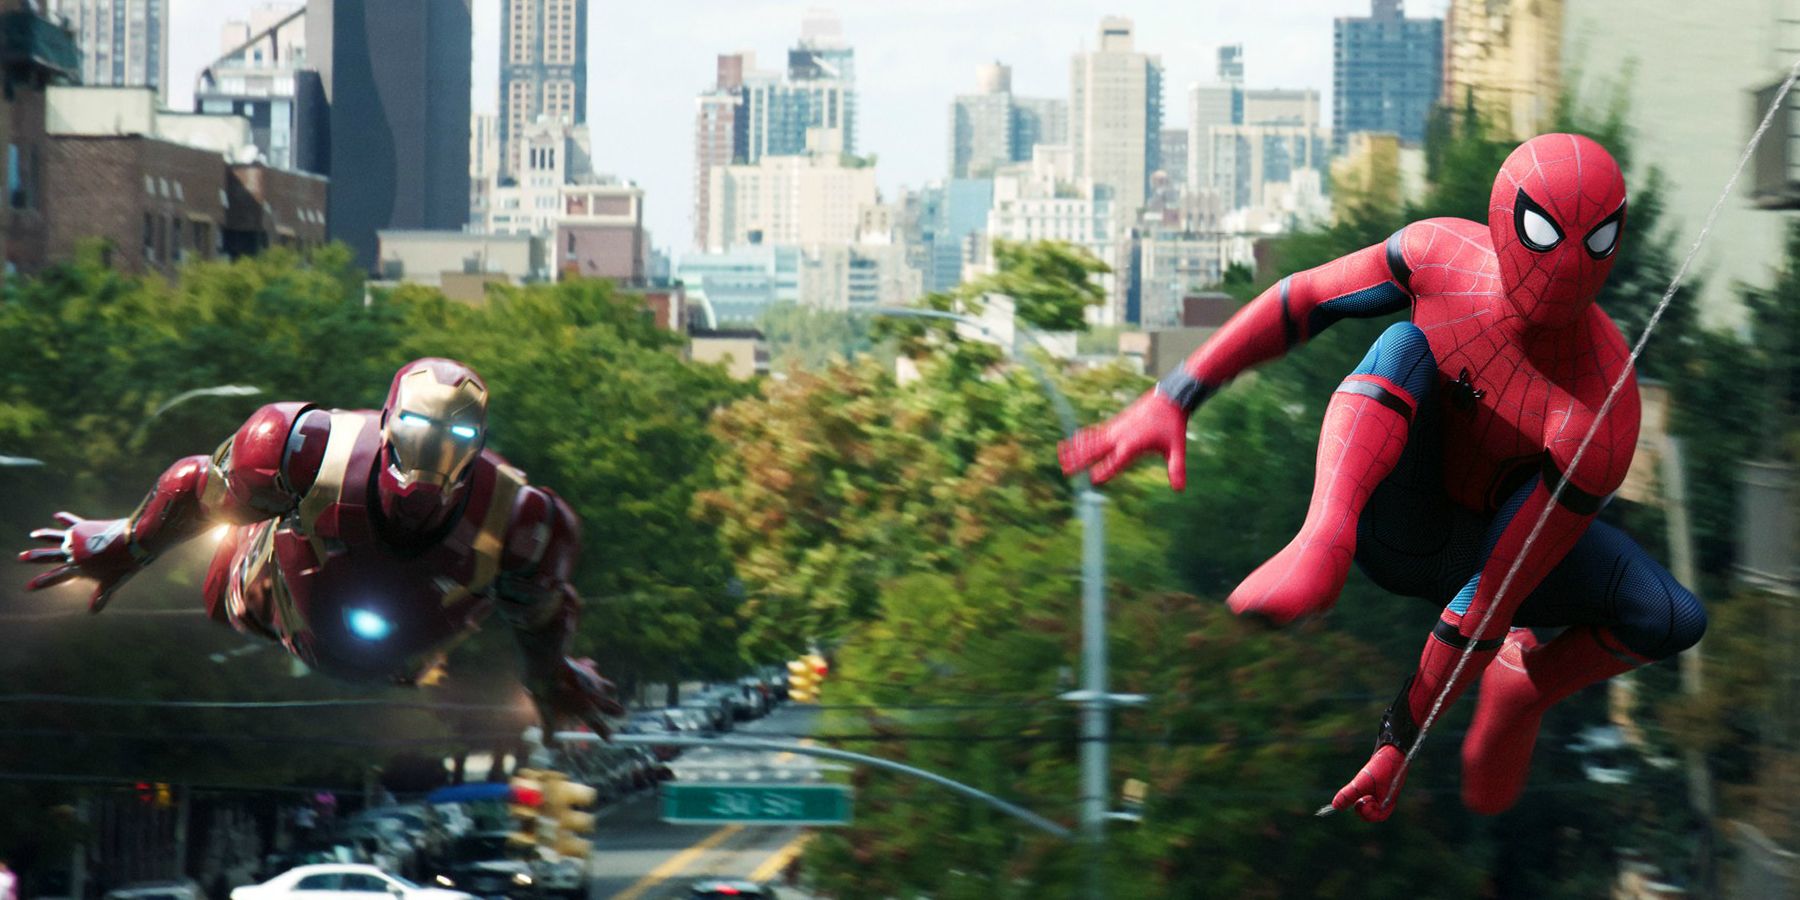 Spider-Man &amp; Iron Man flying about town